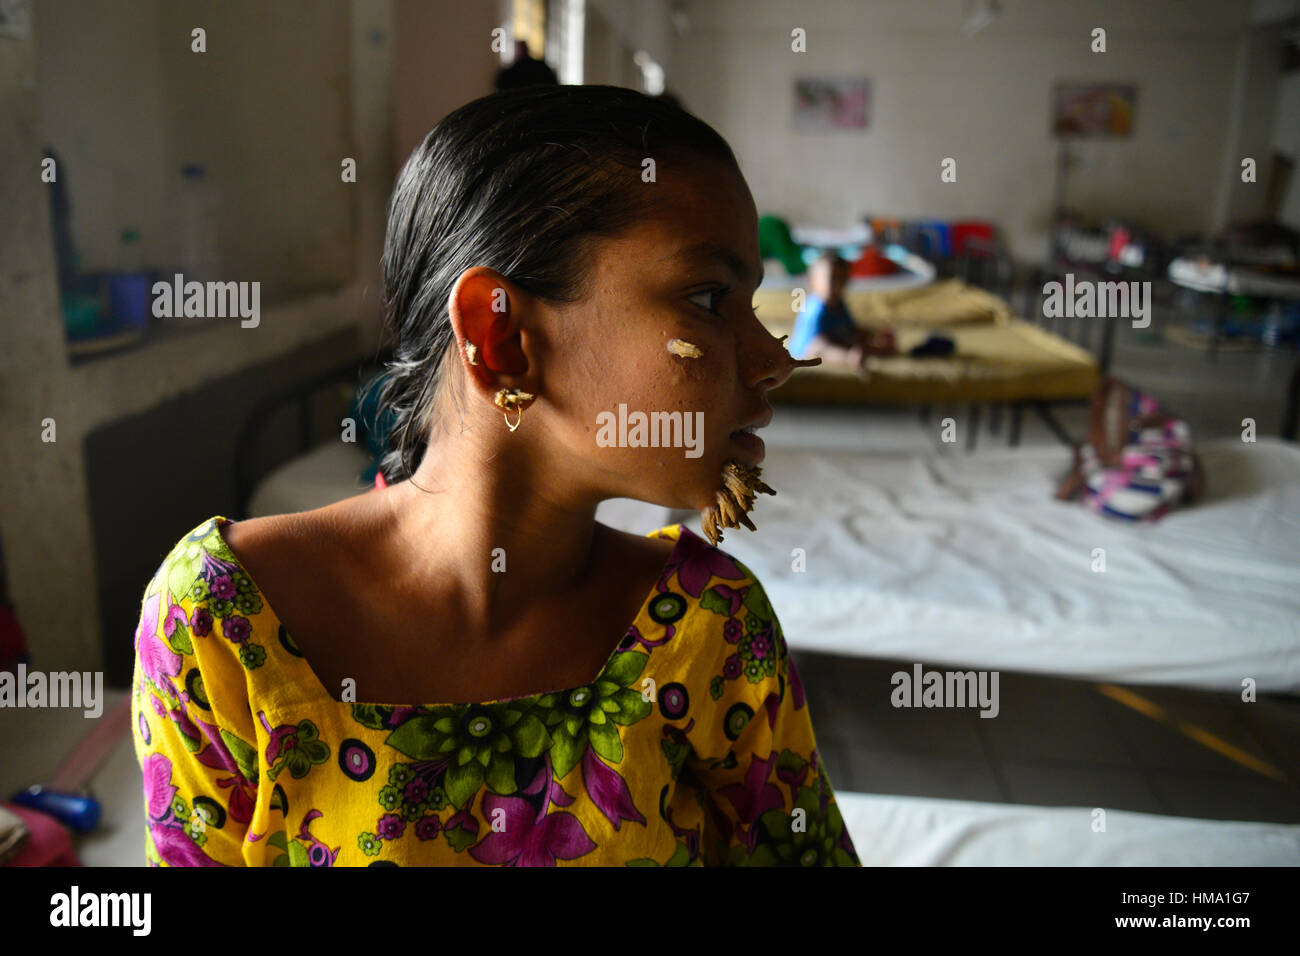 Dhaka, Bangladesh. 1st Feb, 2017. Bangladeshi patient Sahana Khatun, 10, poses for a photograph at the Dhaka Medical College and Hospital. On February 1, 2017 A young Bangladeshi girl with bark-like warts growing on her face could be the first female ever afflicted by so-called 'tree man syndrome', doctors studying the rare condition said January 31. Ten-year-old Sahana Khatun has the tell-tale gnarled growths sprouting from her chin, ear and nose, but doctors at Dhaka's Medical College Hospital are still conducting tests to establish if she has the unusual skin disorder. Credit: Mamunur Rashi Stock Photo